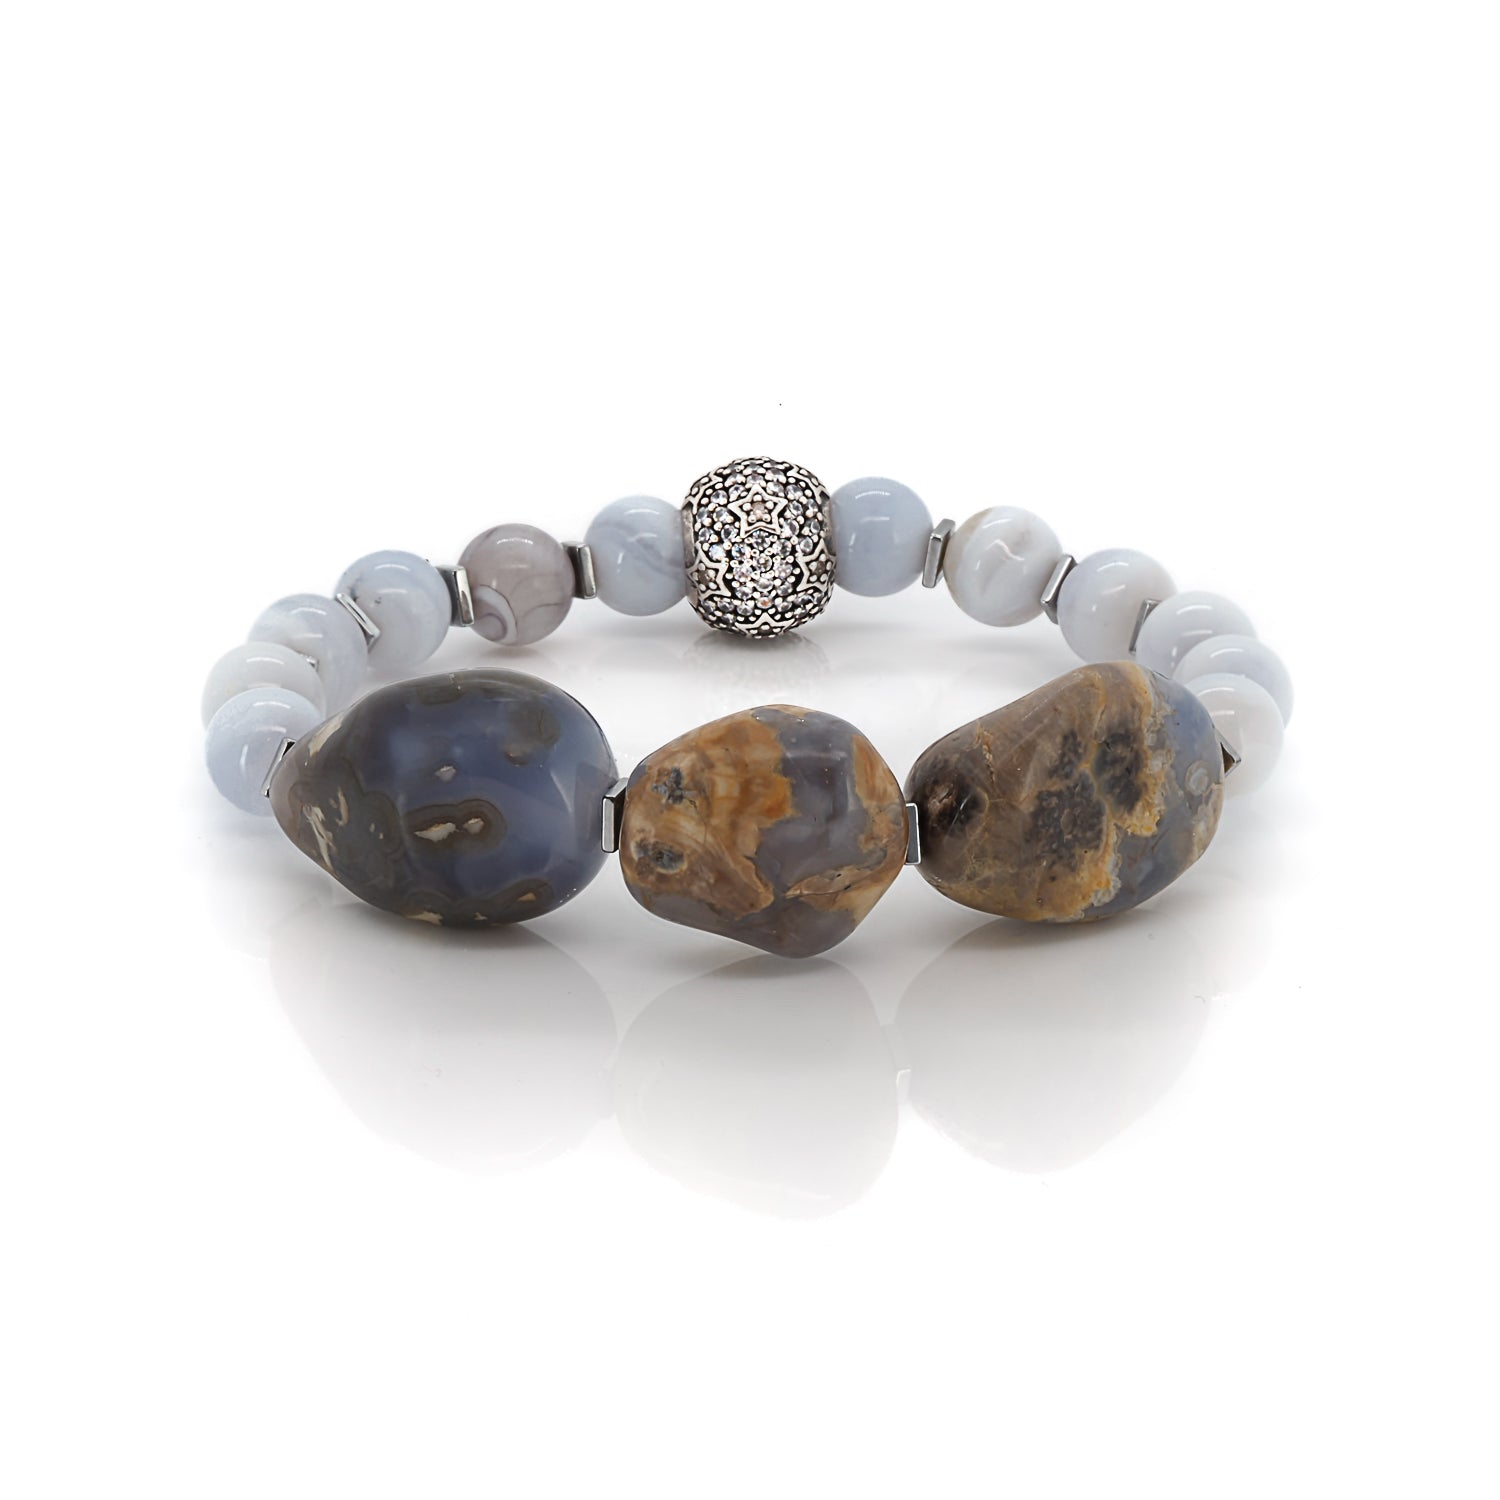 Balancing Agate Gemstone Bracelet - A visual delight in natural hues.